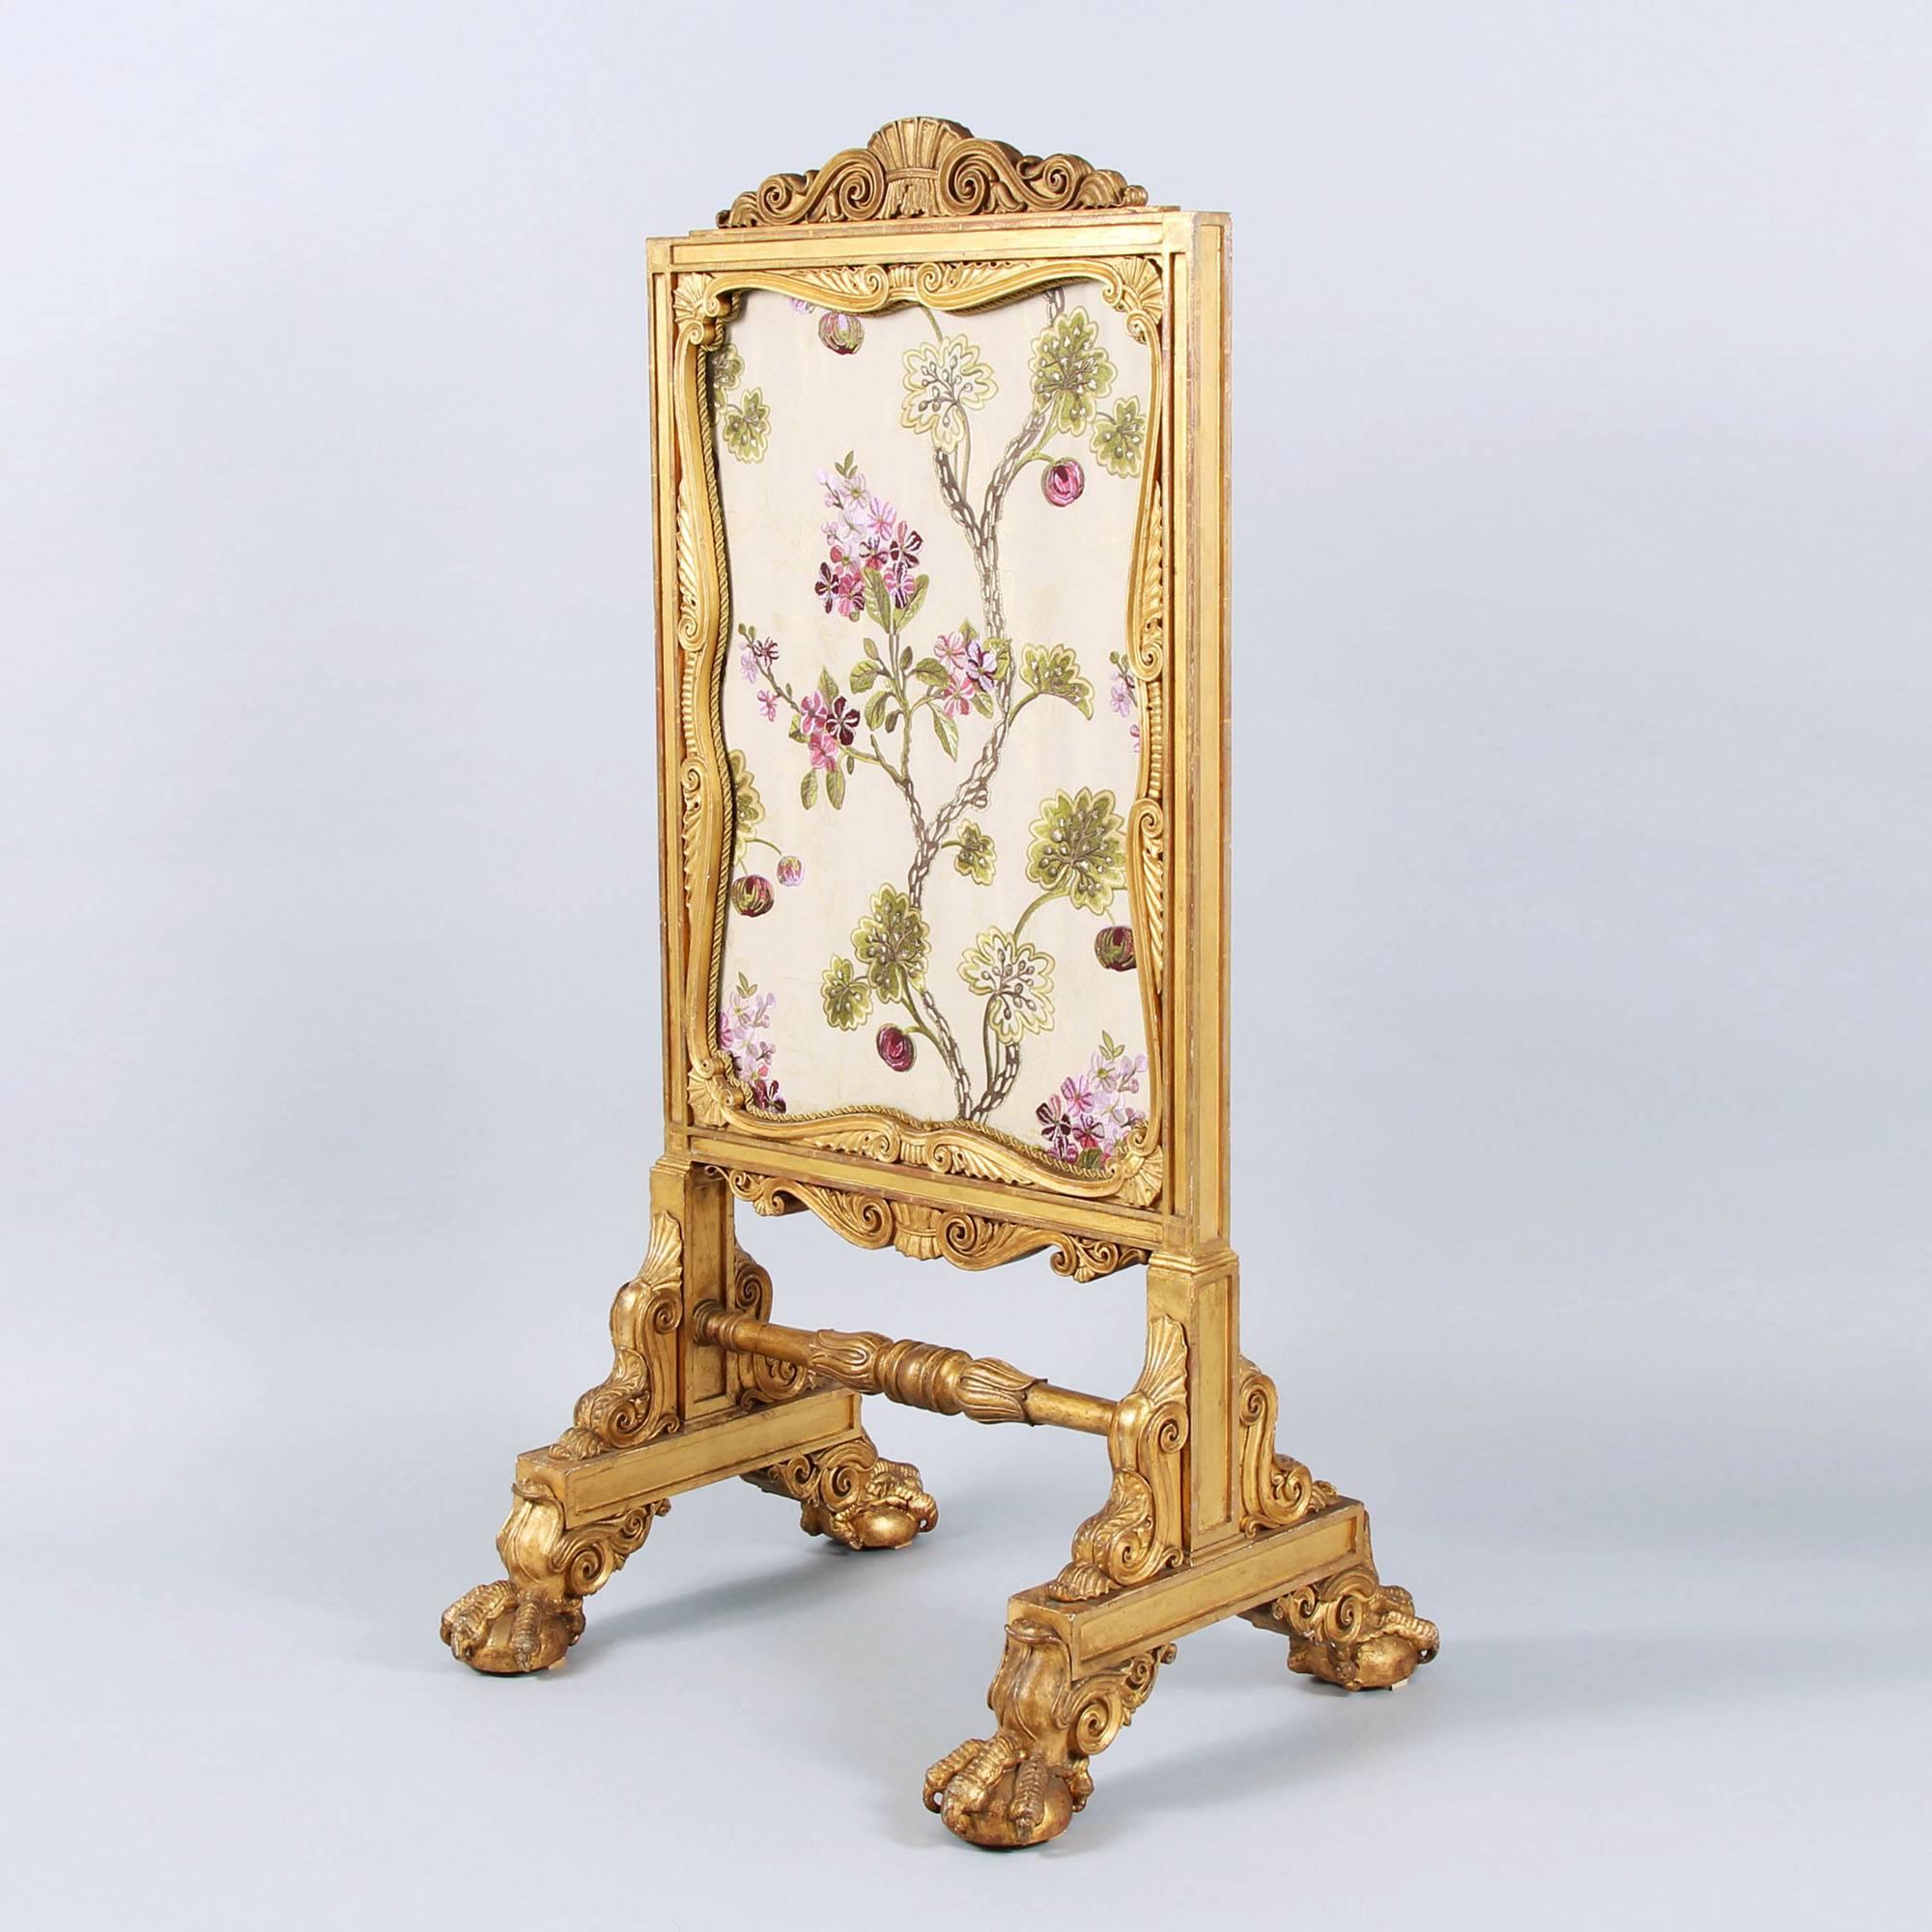 Early 19th Century Giltwood Fire Screen, Regency In Excellent Condition In London, by appointment only